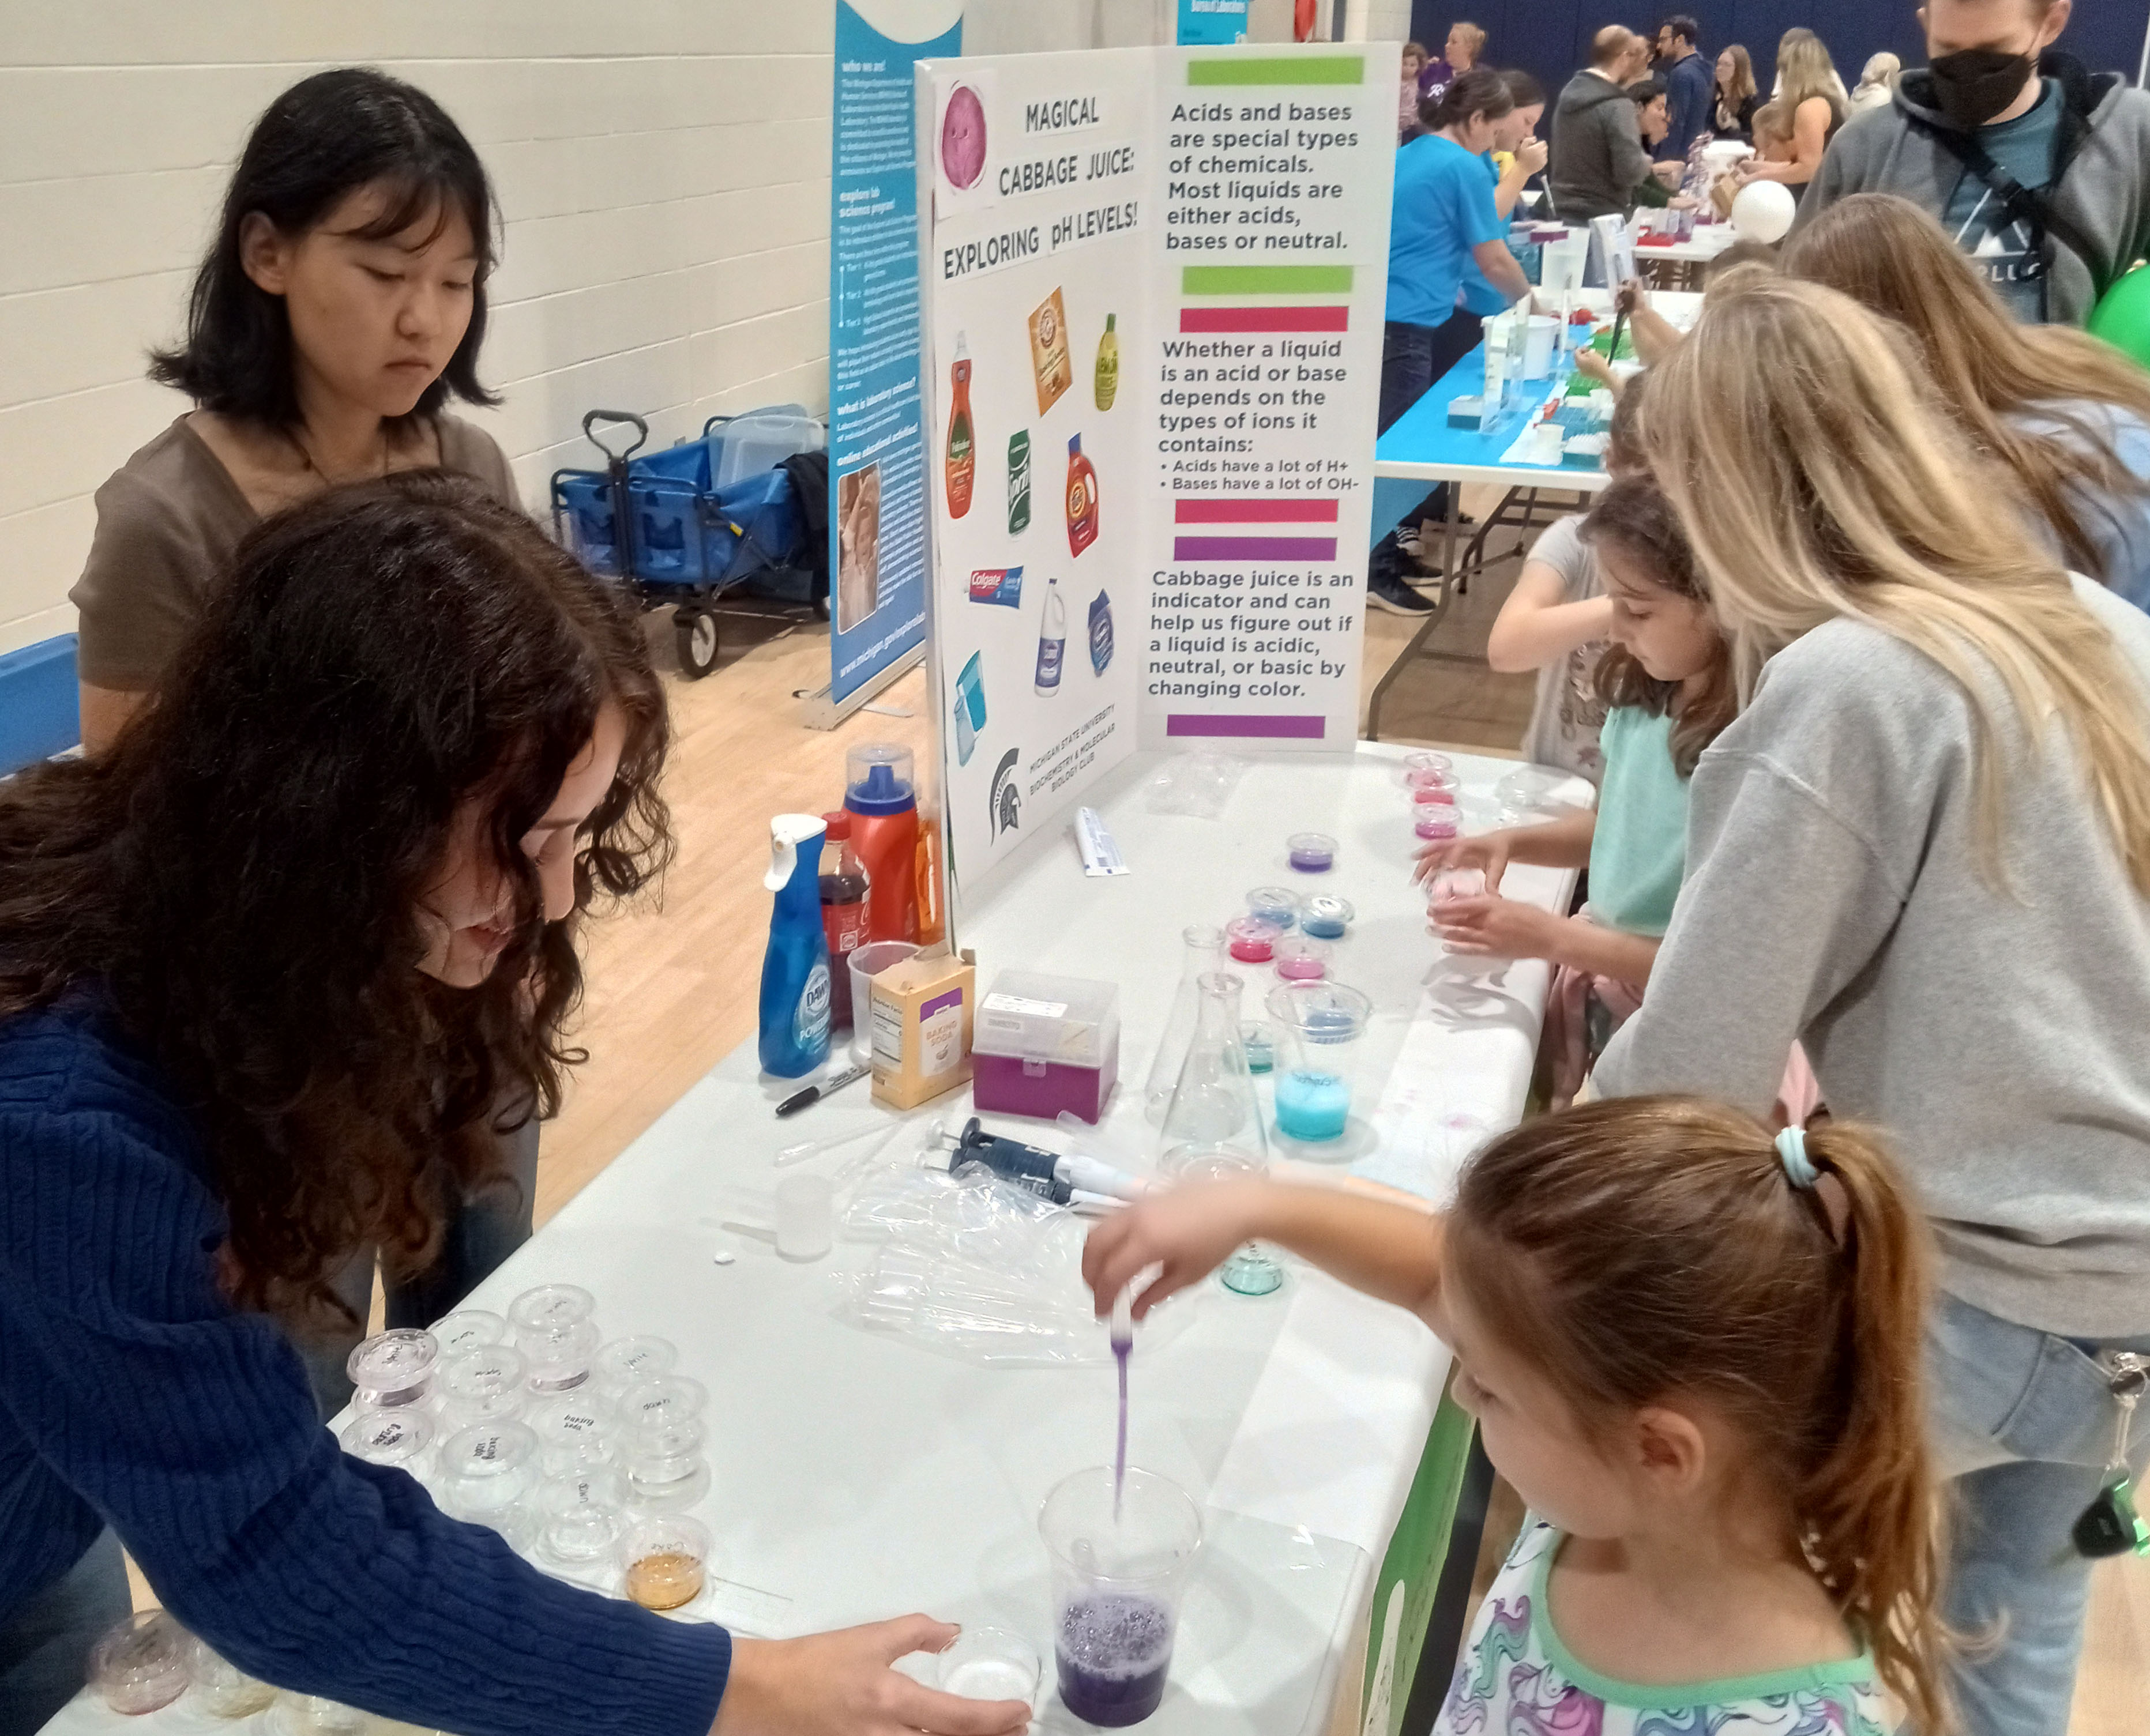 BMB Club members lead hands-on experiments at Science Night